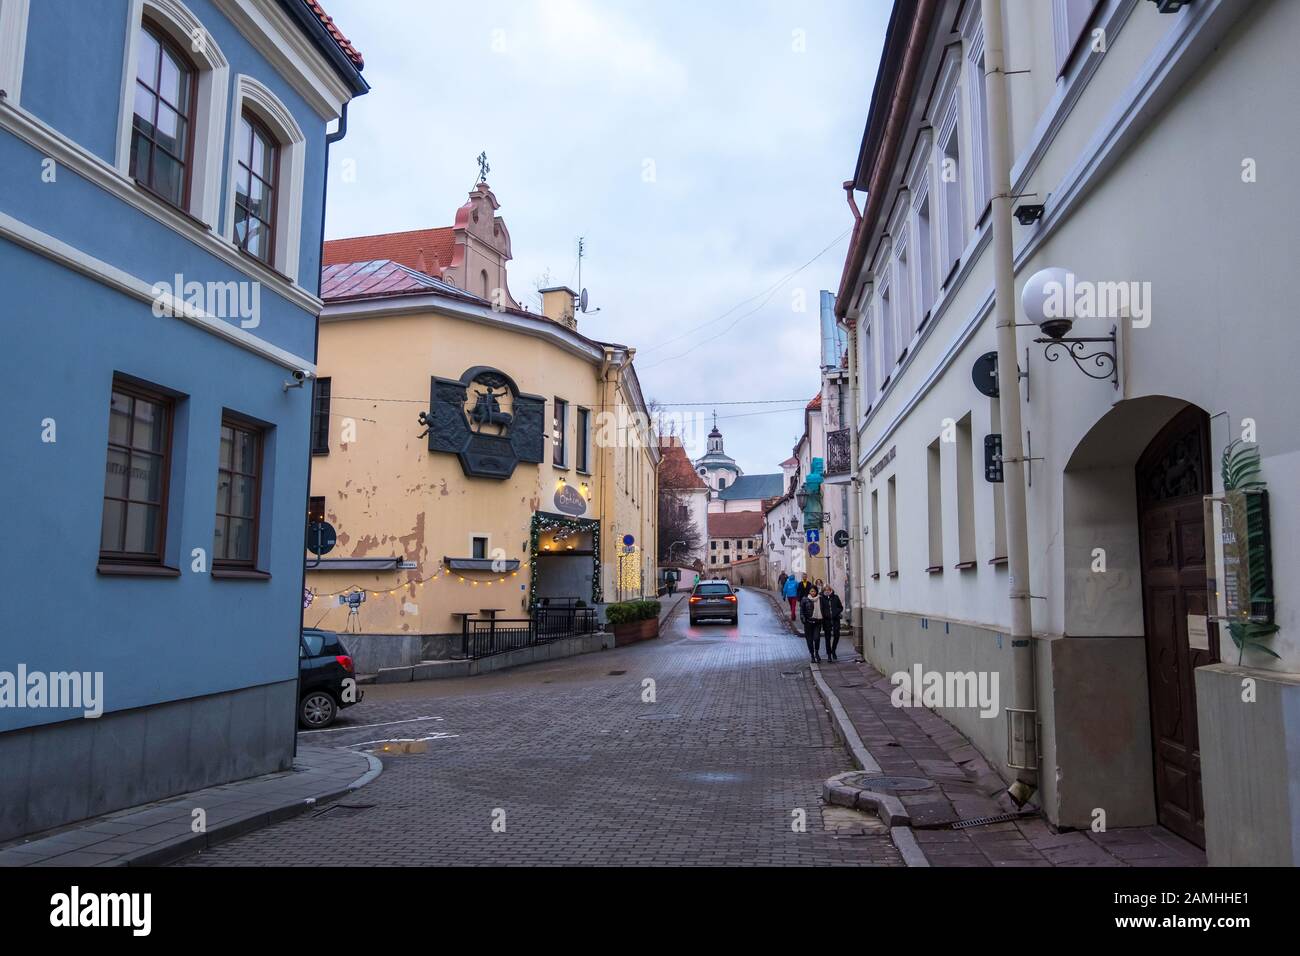 Vilnius, Lithuania - December 15, 2019: View of ancient street in Old city center in Vilnius, Lithuania Stock Photo